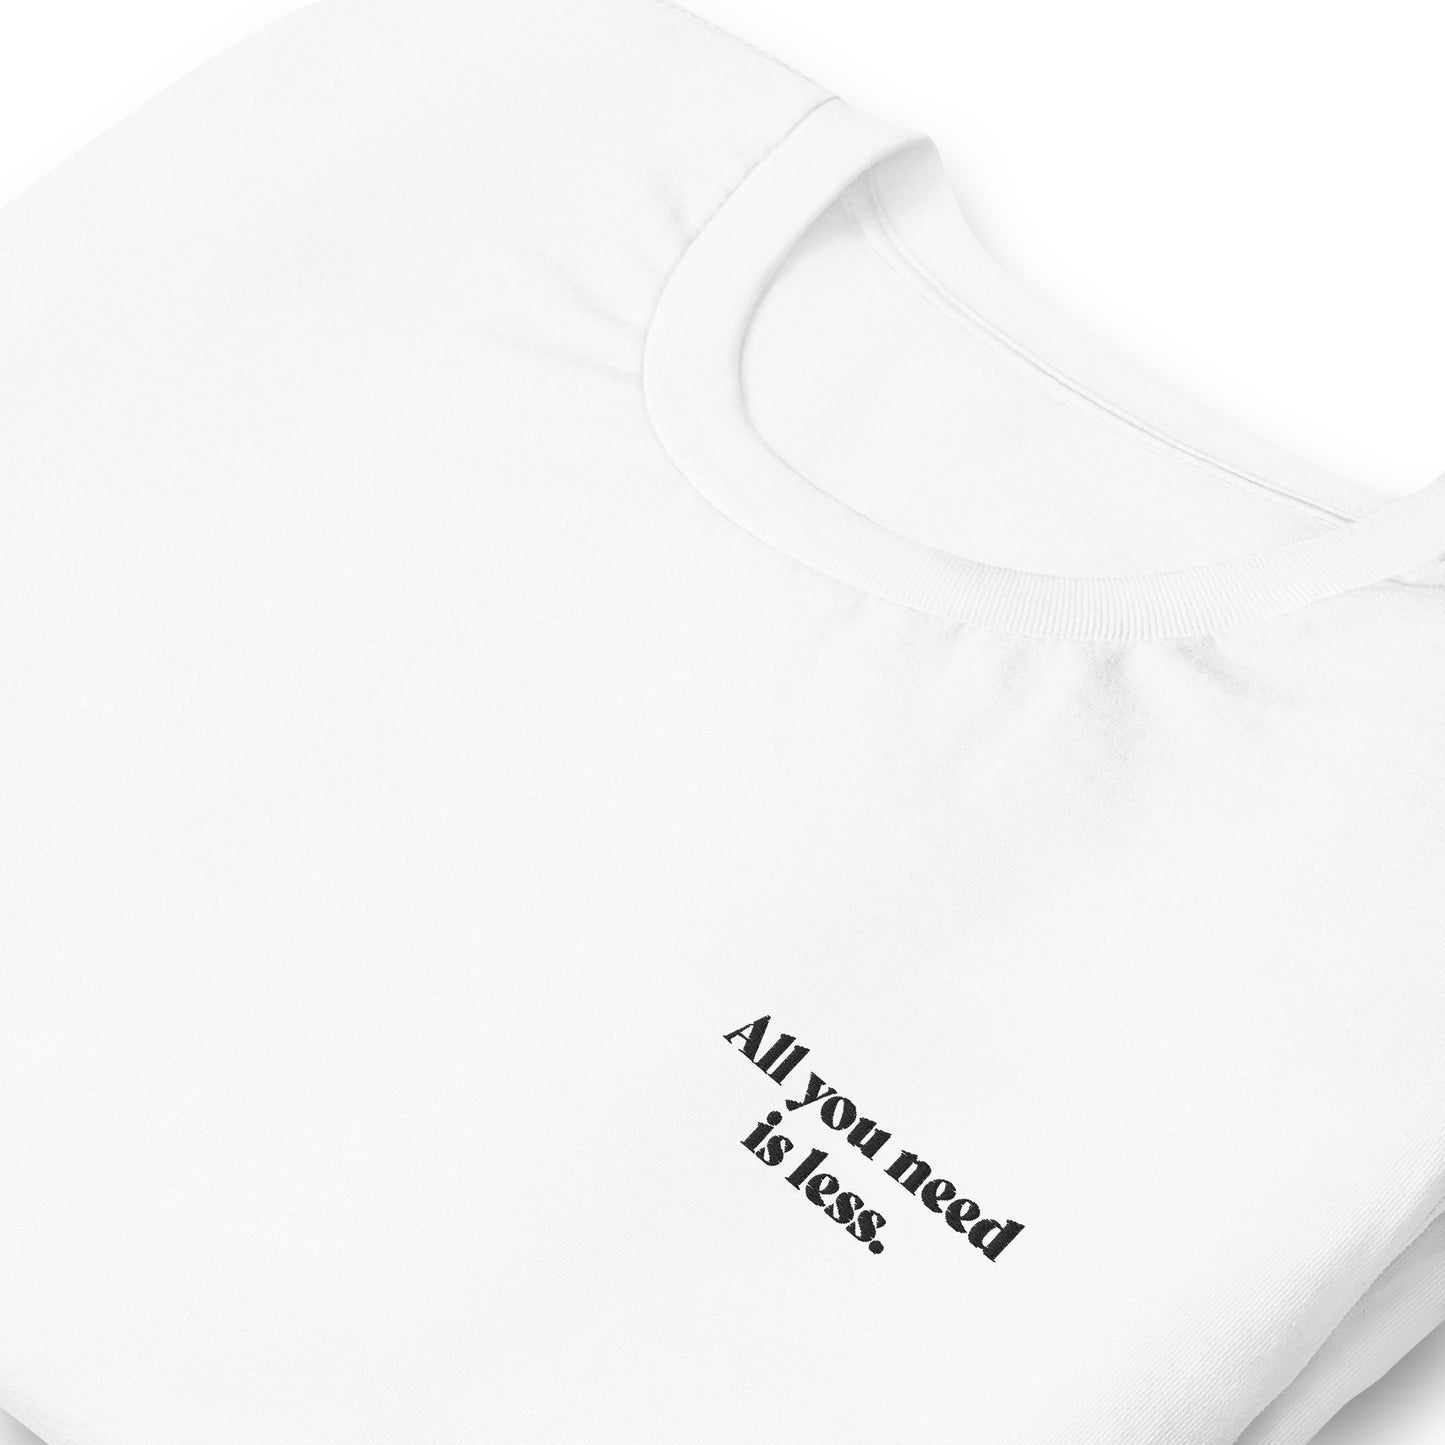 All you need is less. - embroidered T-shirt